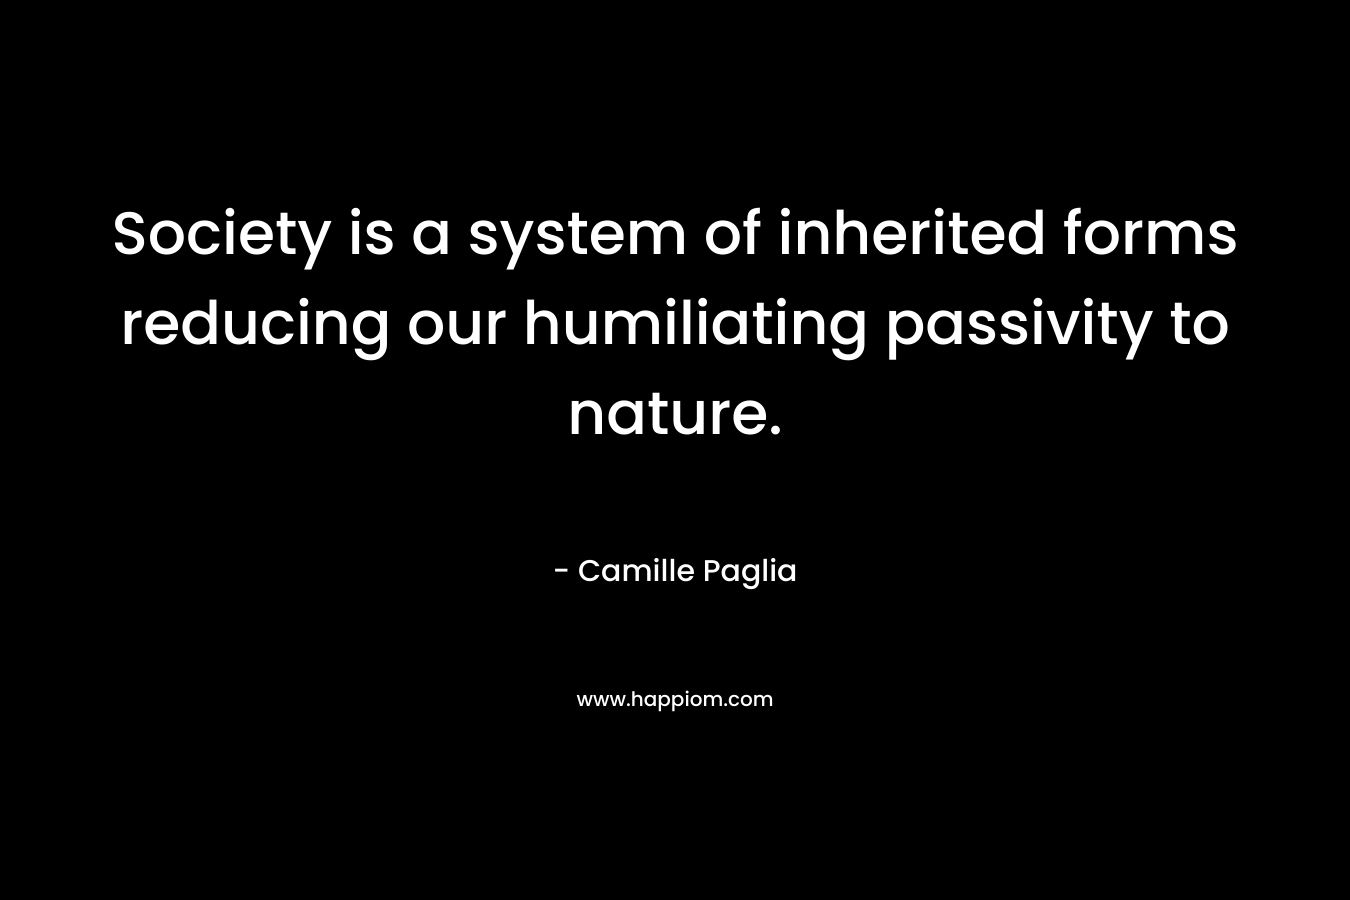 Society is a system of inherited forms reducing our humiliating passivity to nature. – Camille Paglia